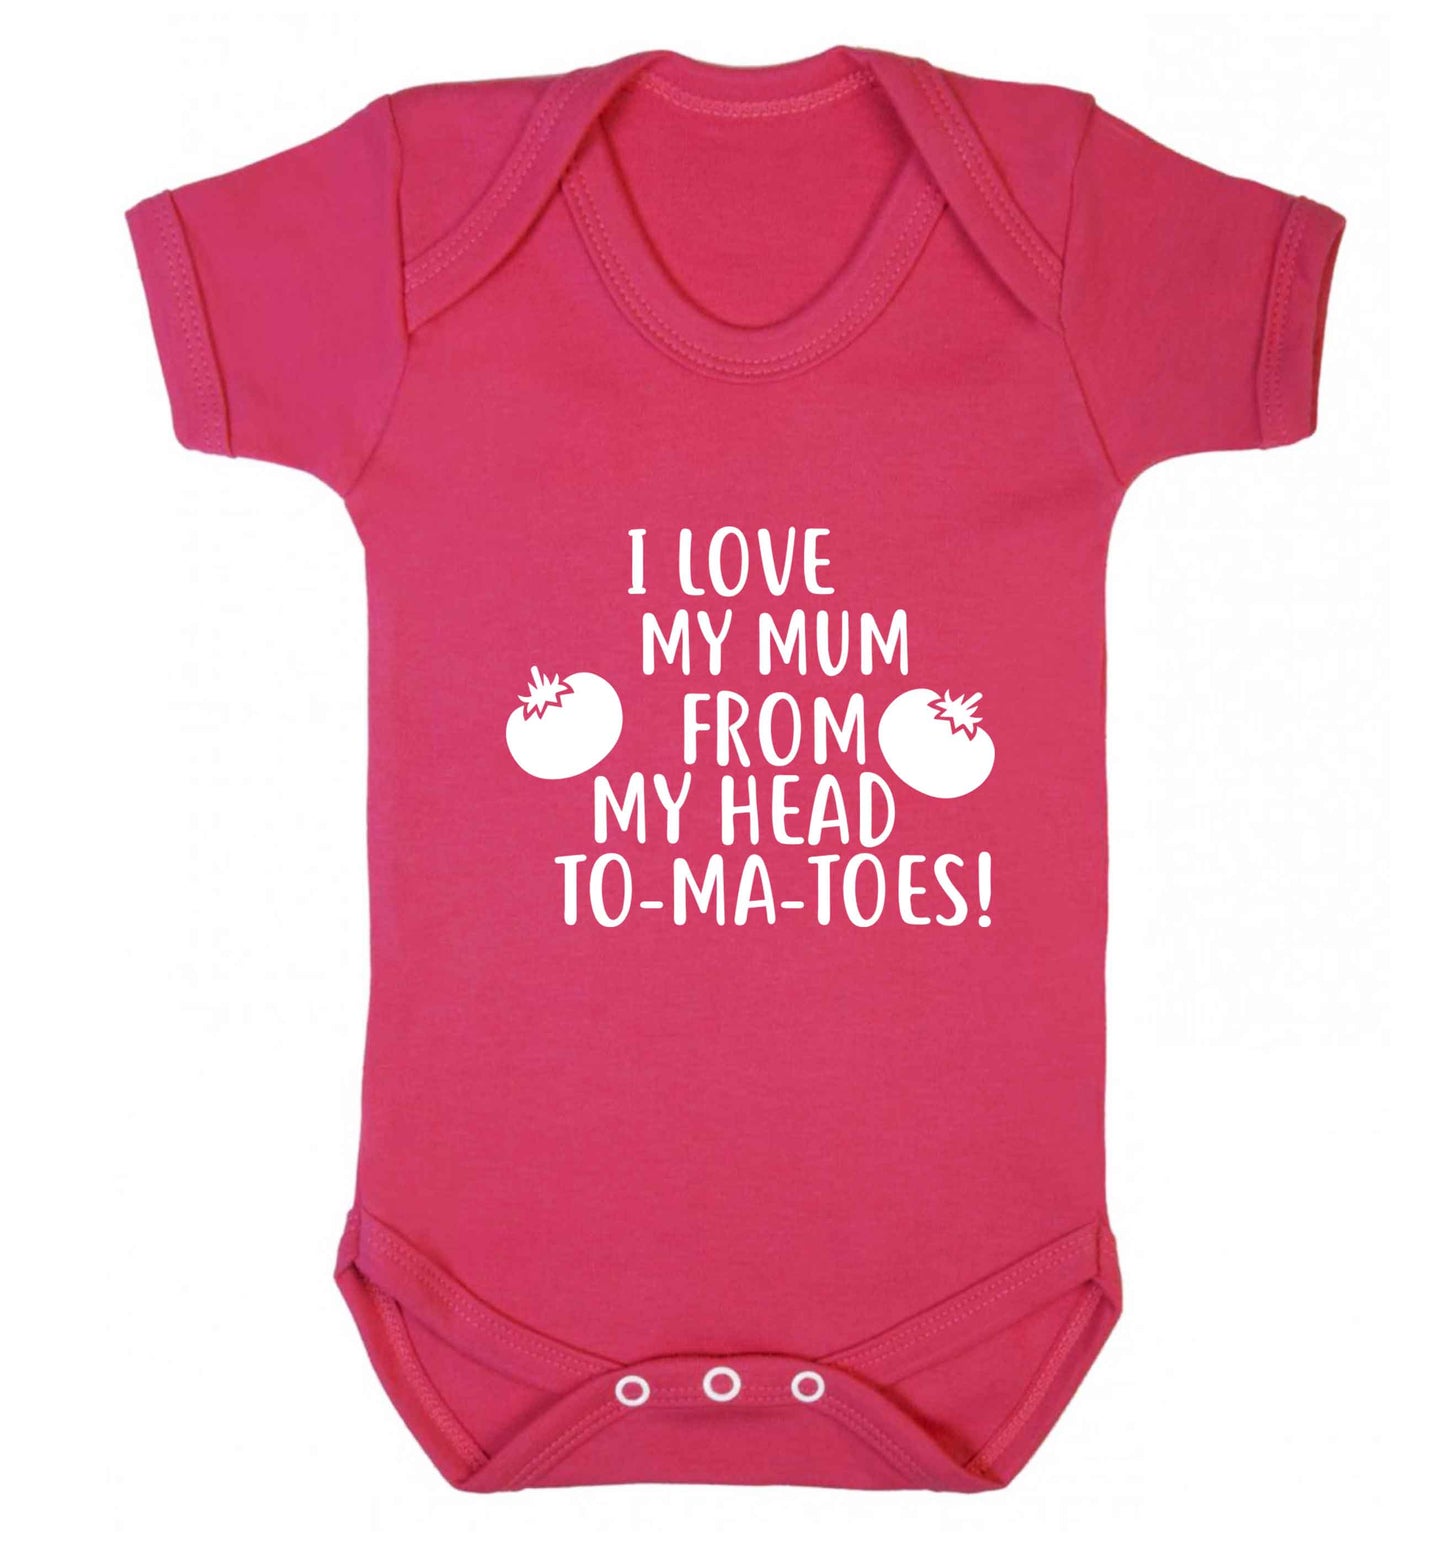 I love my mum from my head to-my-toes! baby vest dark pink 18-24 months